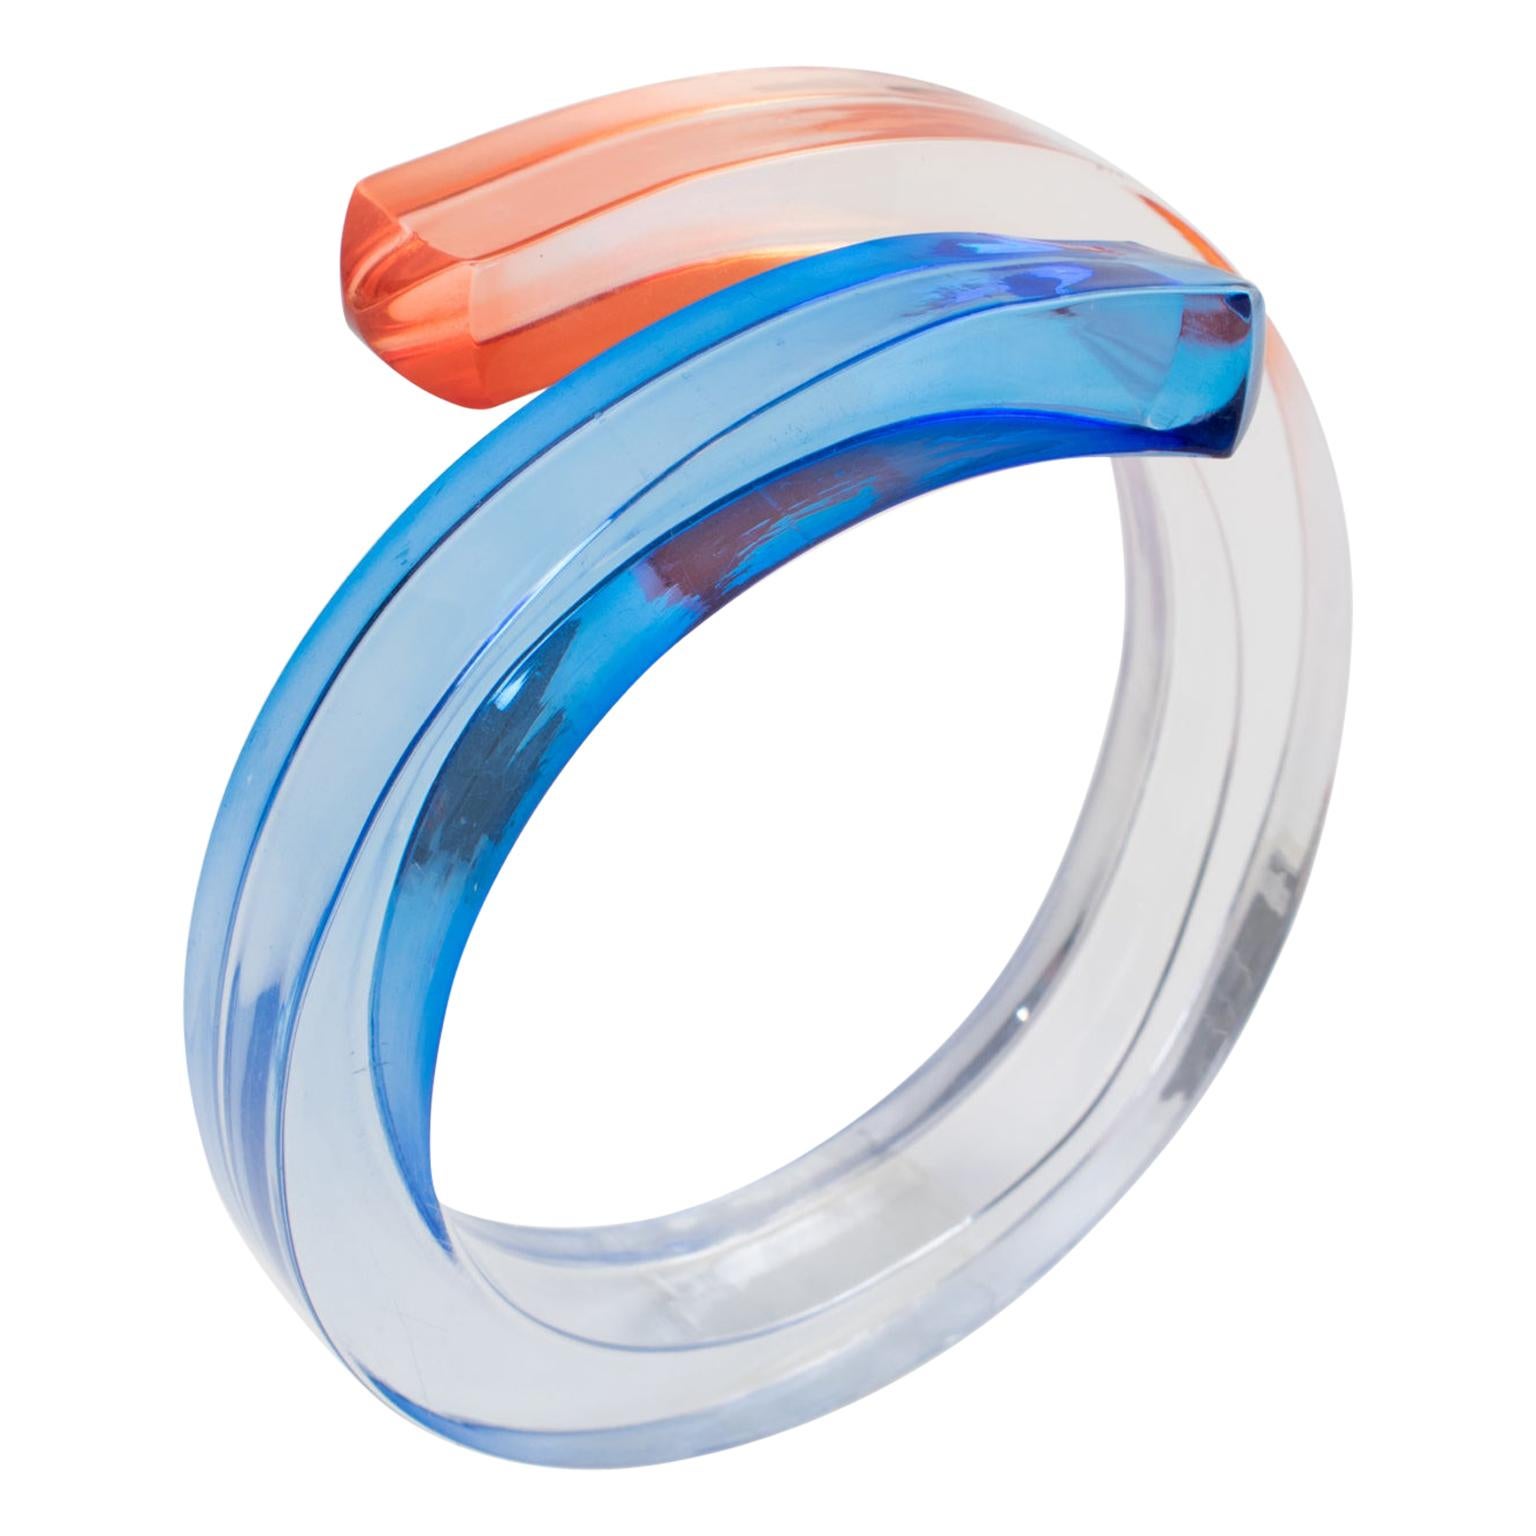 Oversized Pink and Blue Lucite Coiled Bangle Bracelet